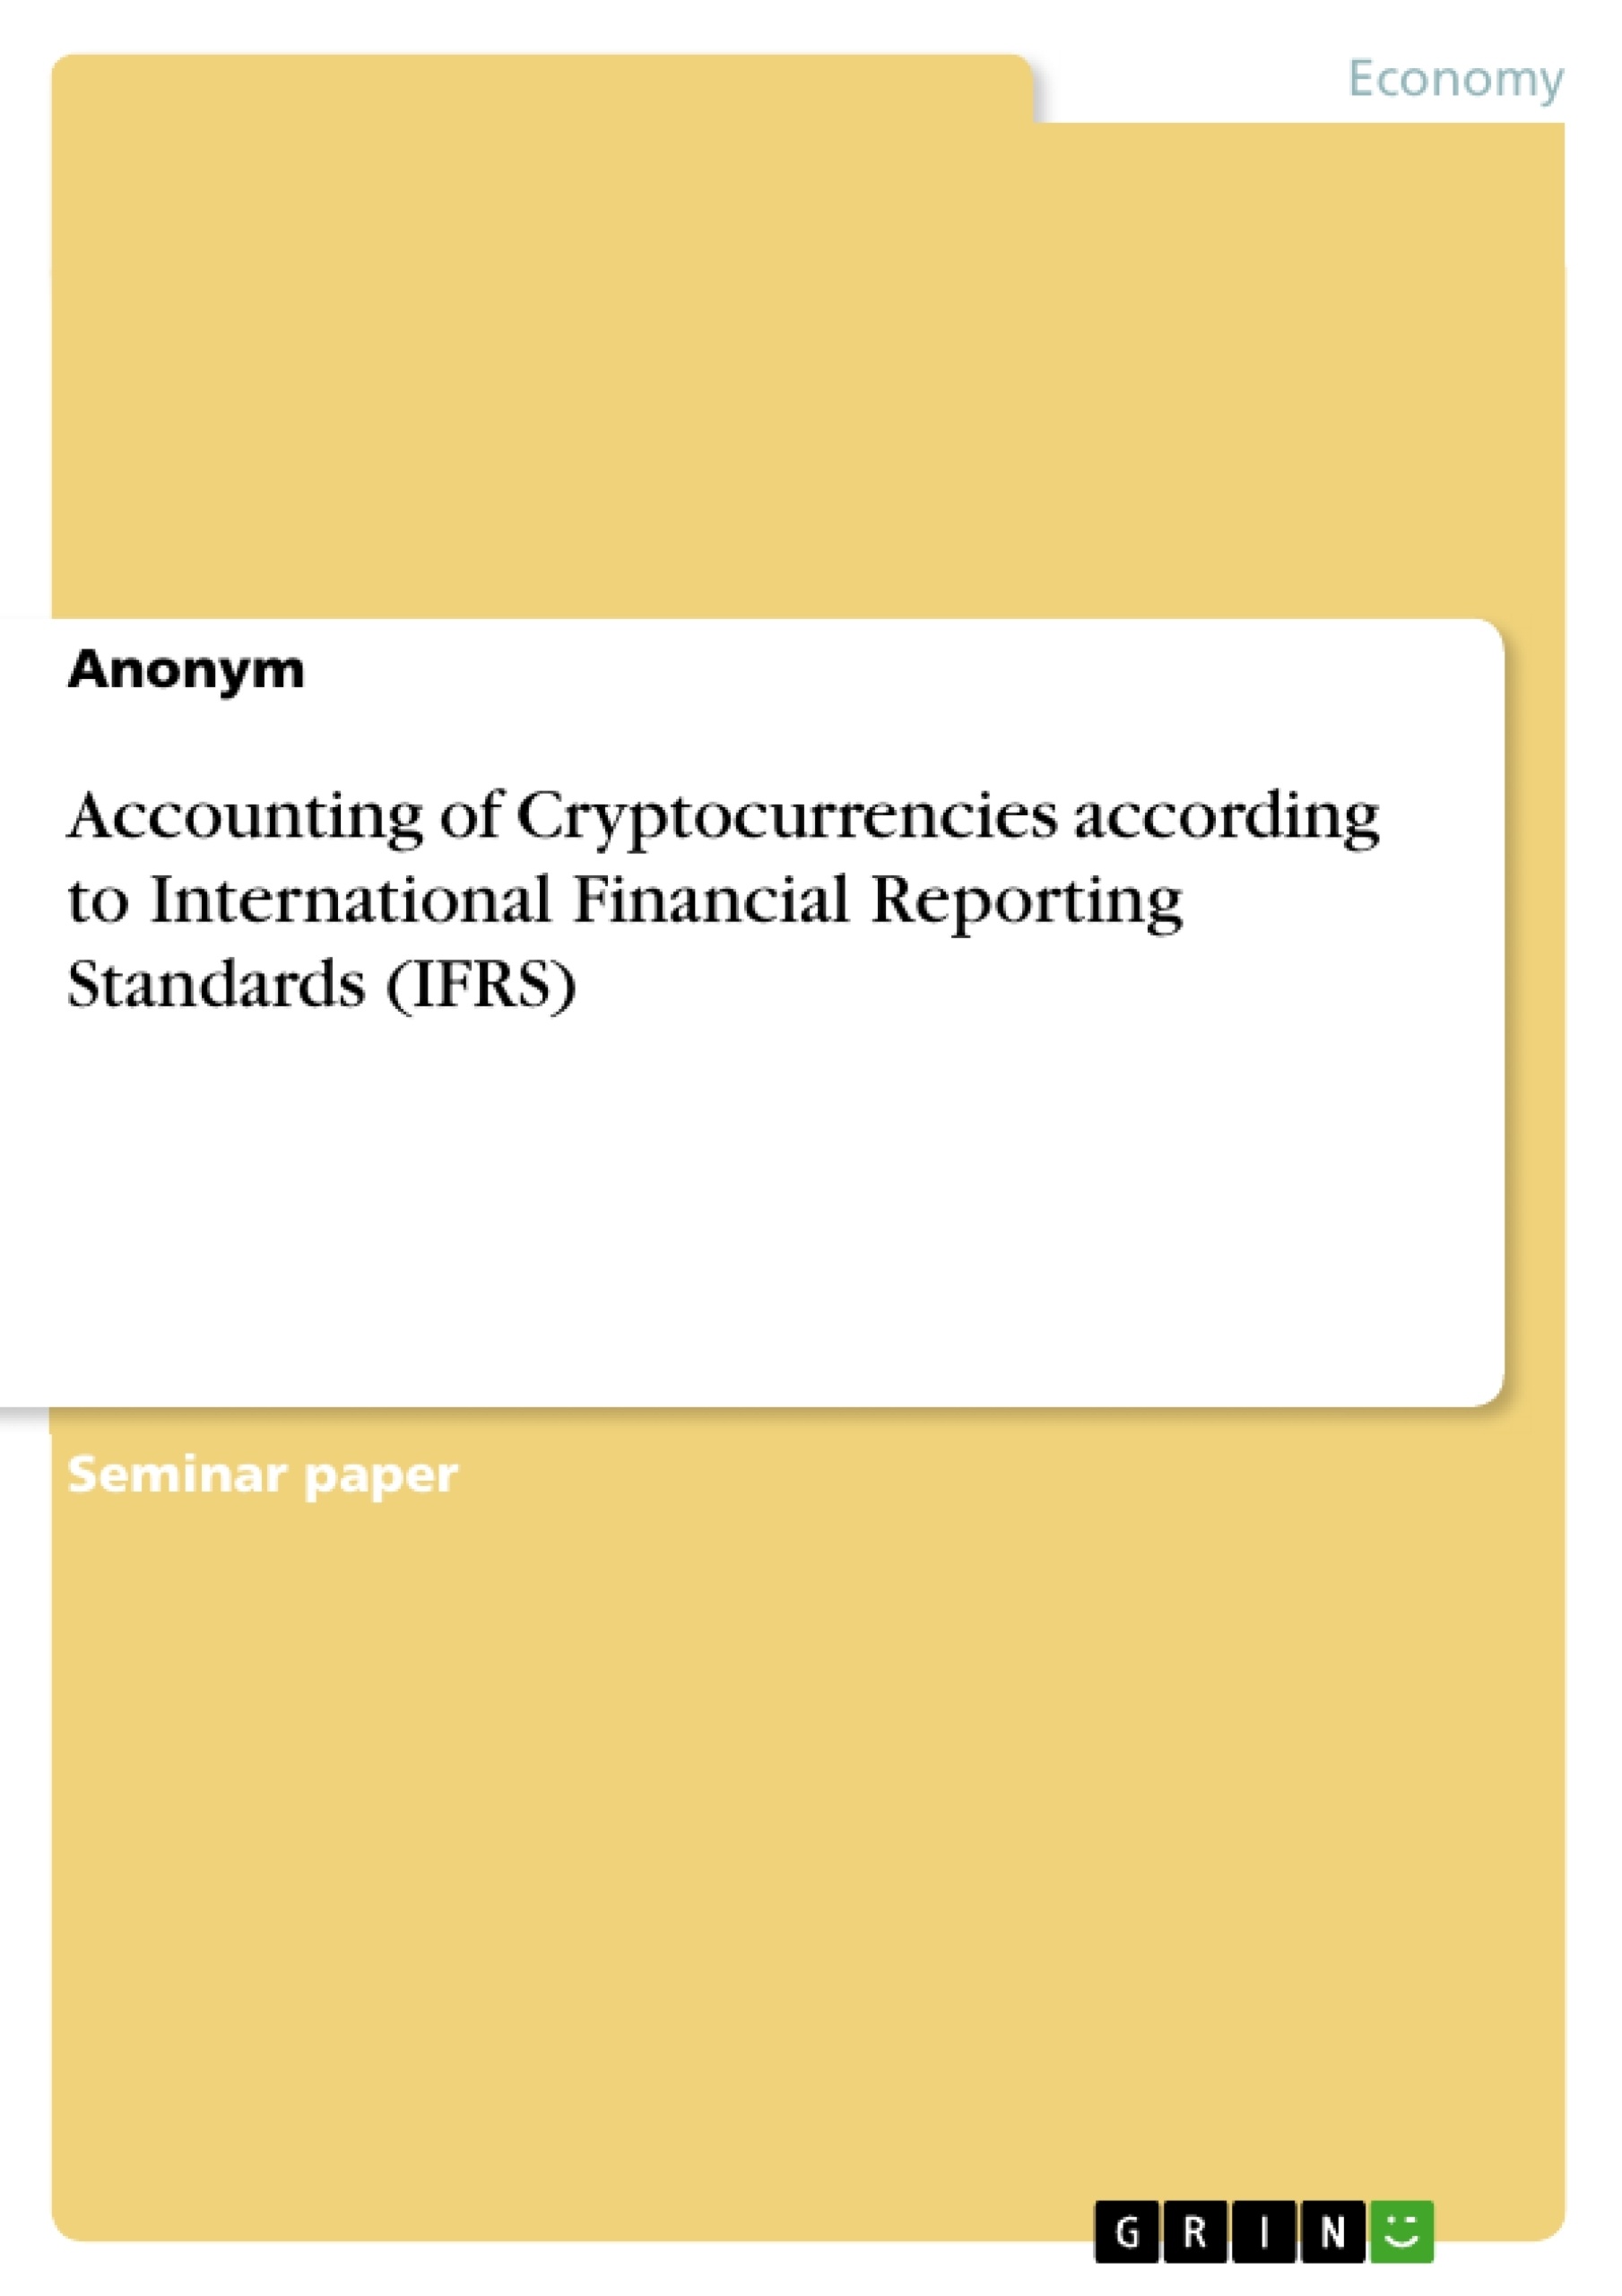 Title: Accounting of Cryptocurrencies according to International Financial Reporting Standards (IFRS)